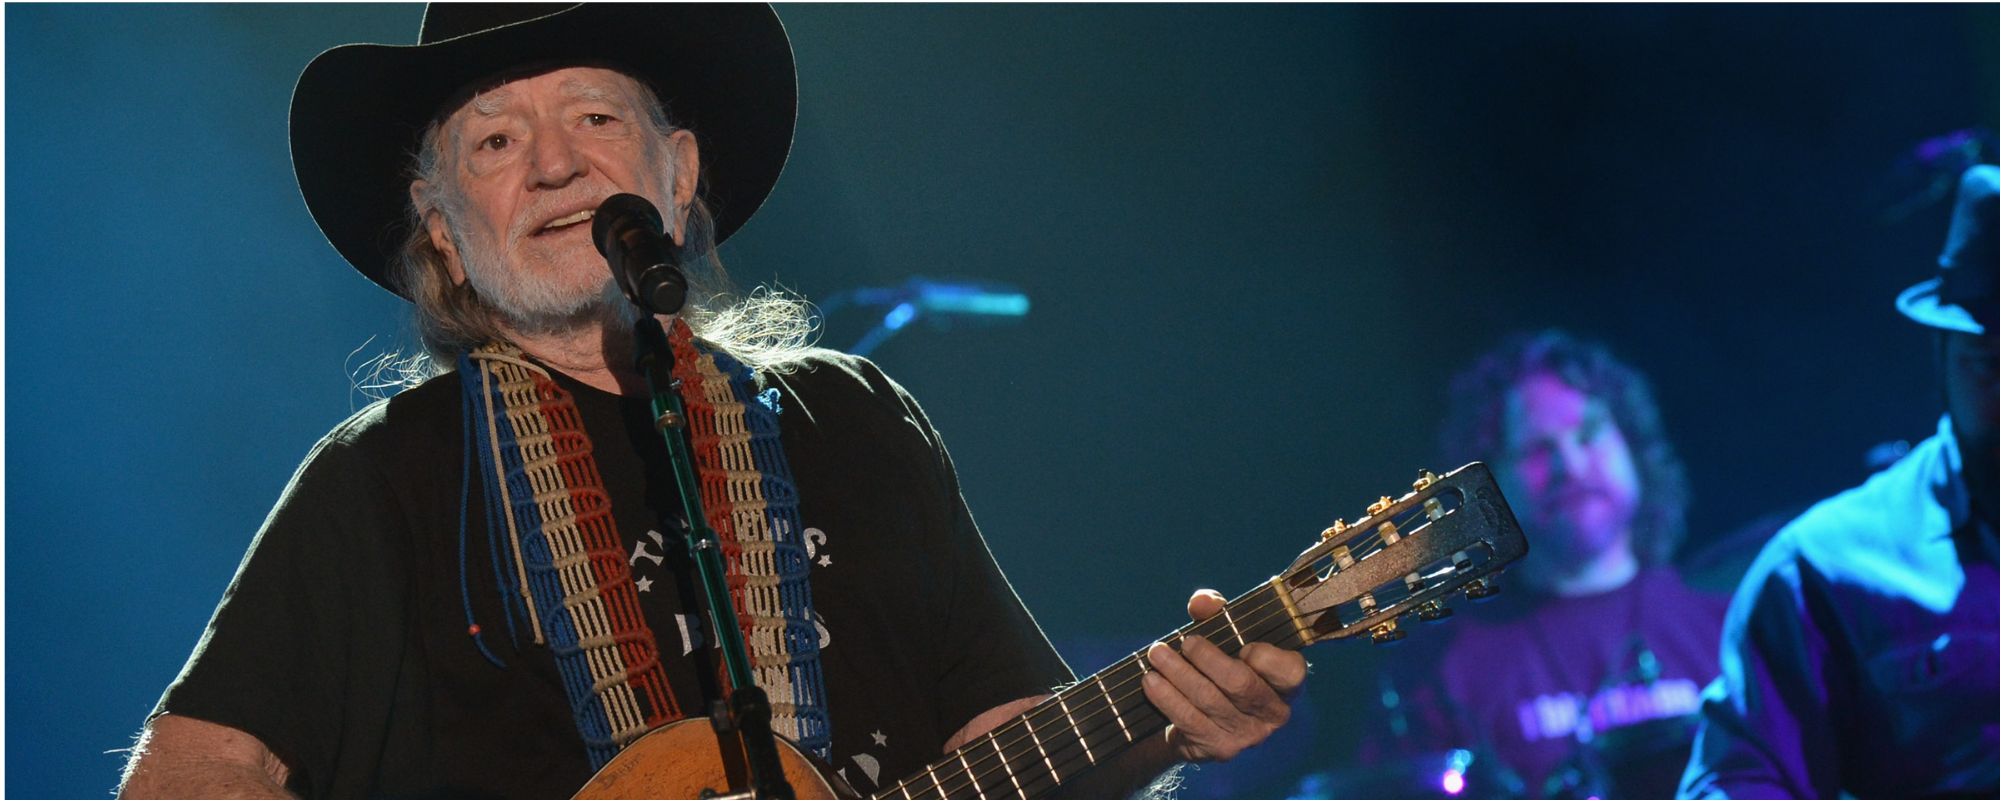 Willie Nelson At 90: Special Concert Celebration to Air in December